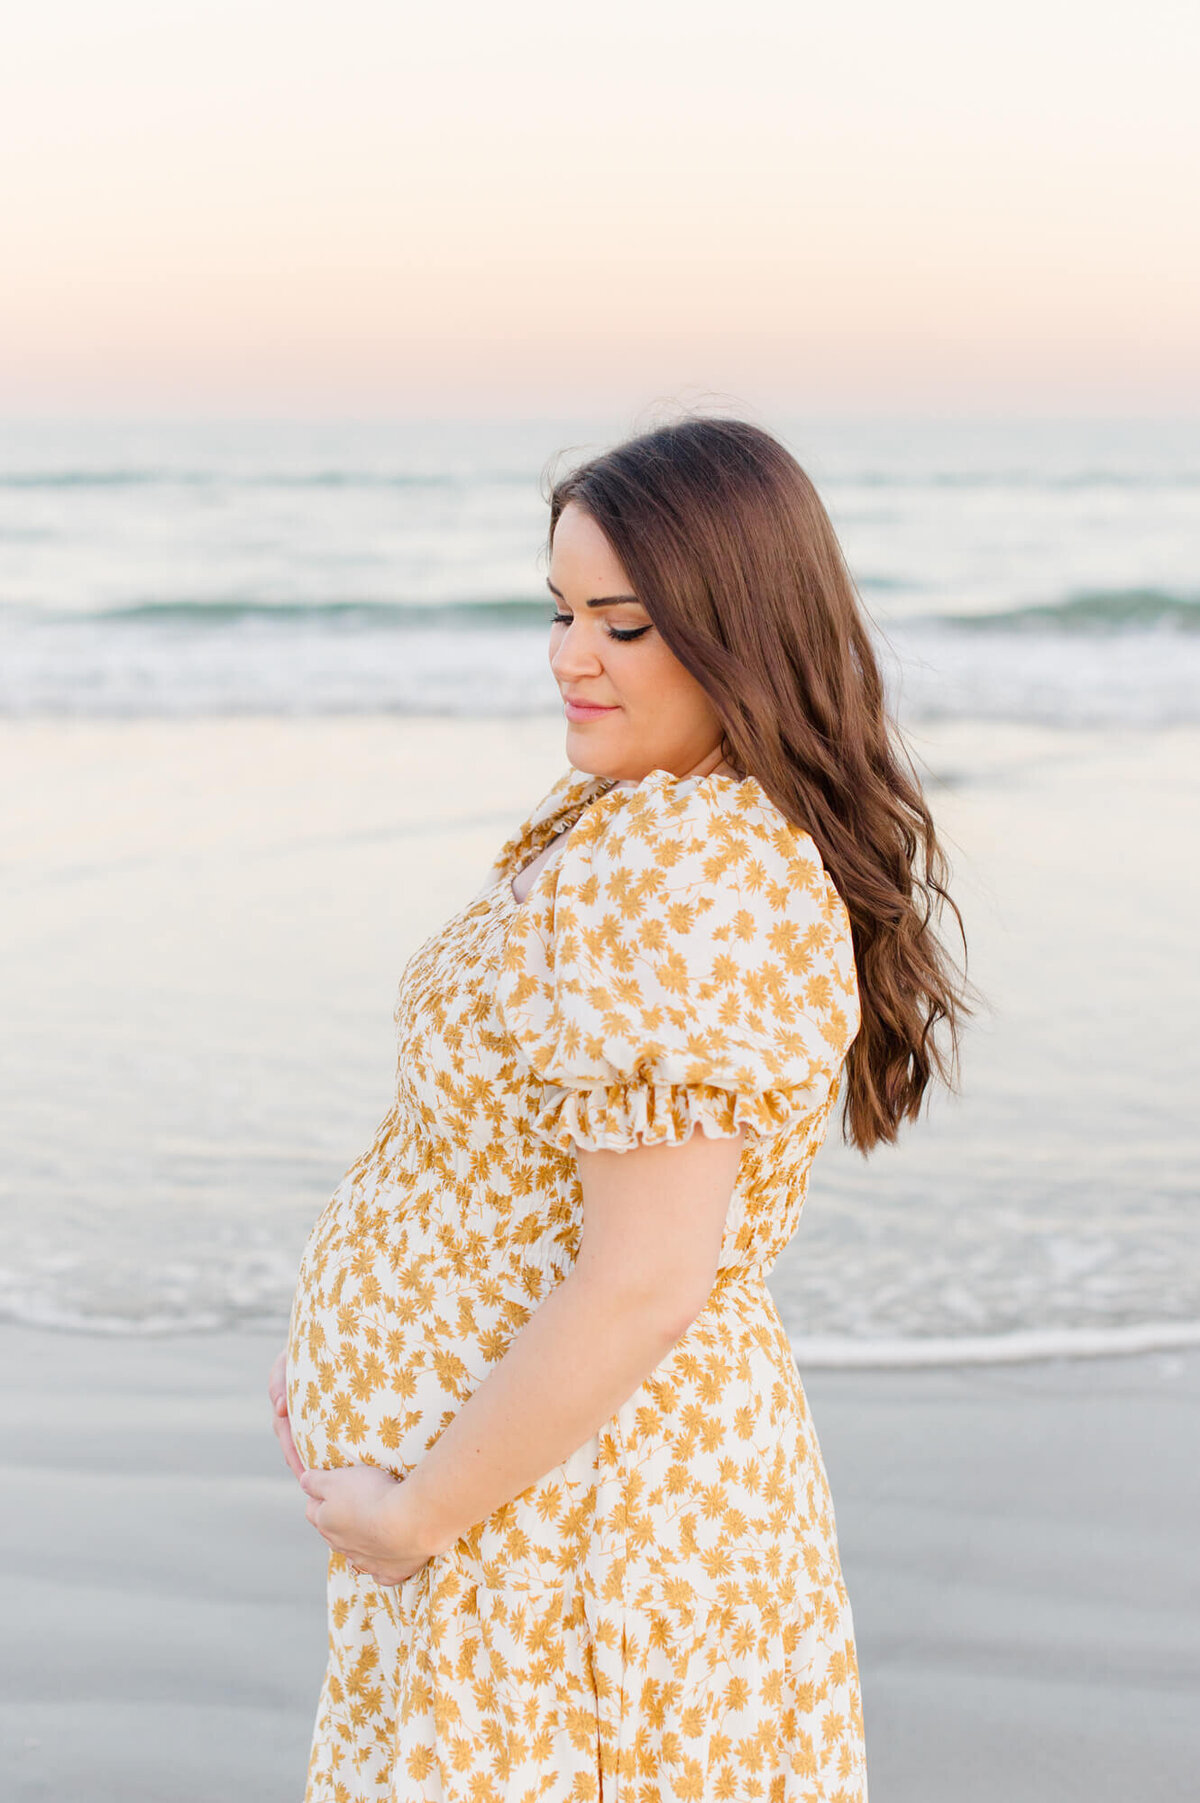 Expectant mother holds her belly and looks down at her baby on the beach a shore drive from Orlando